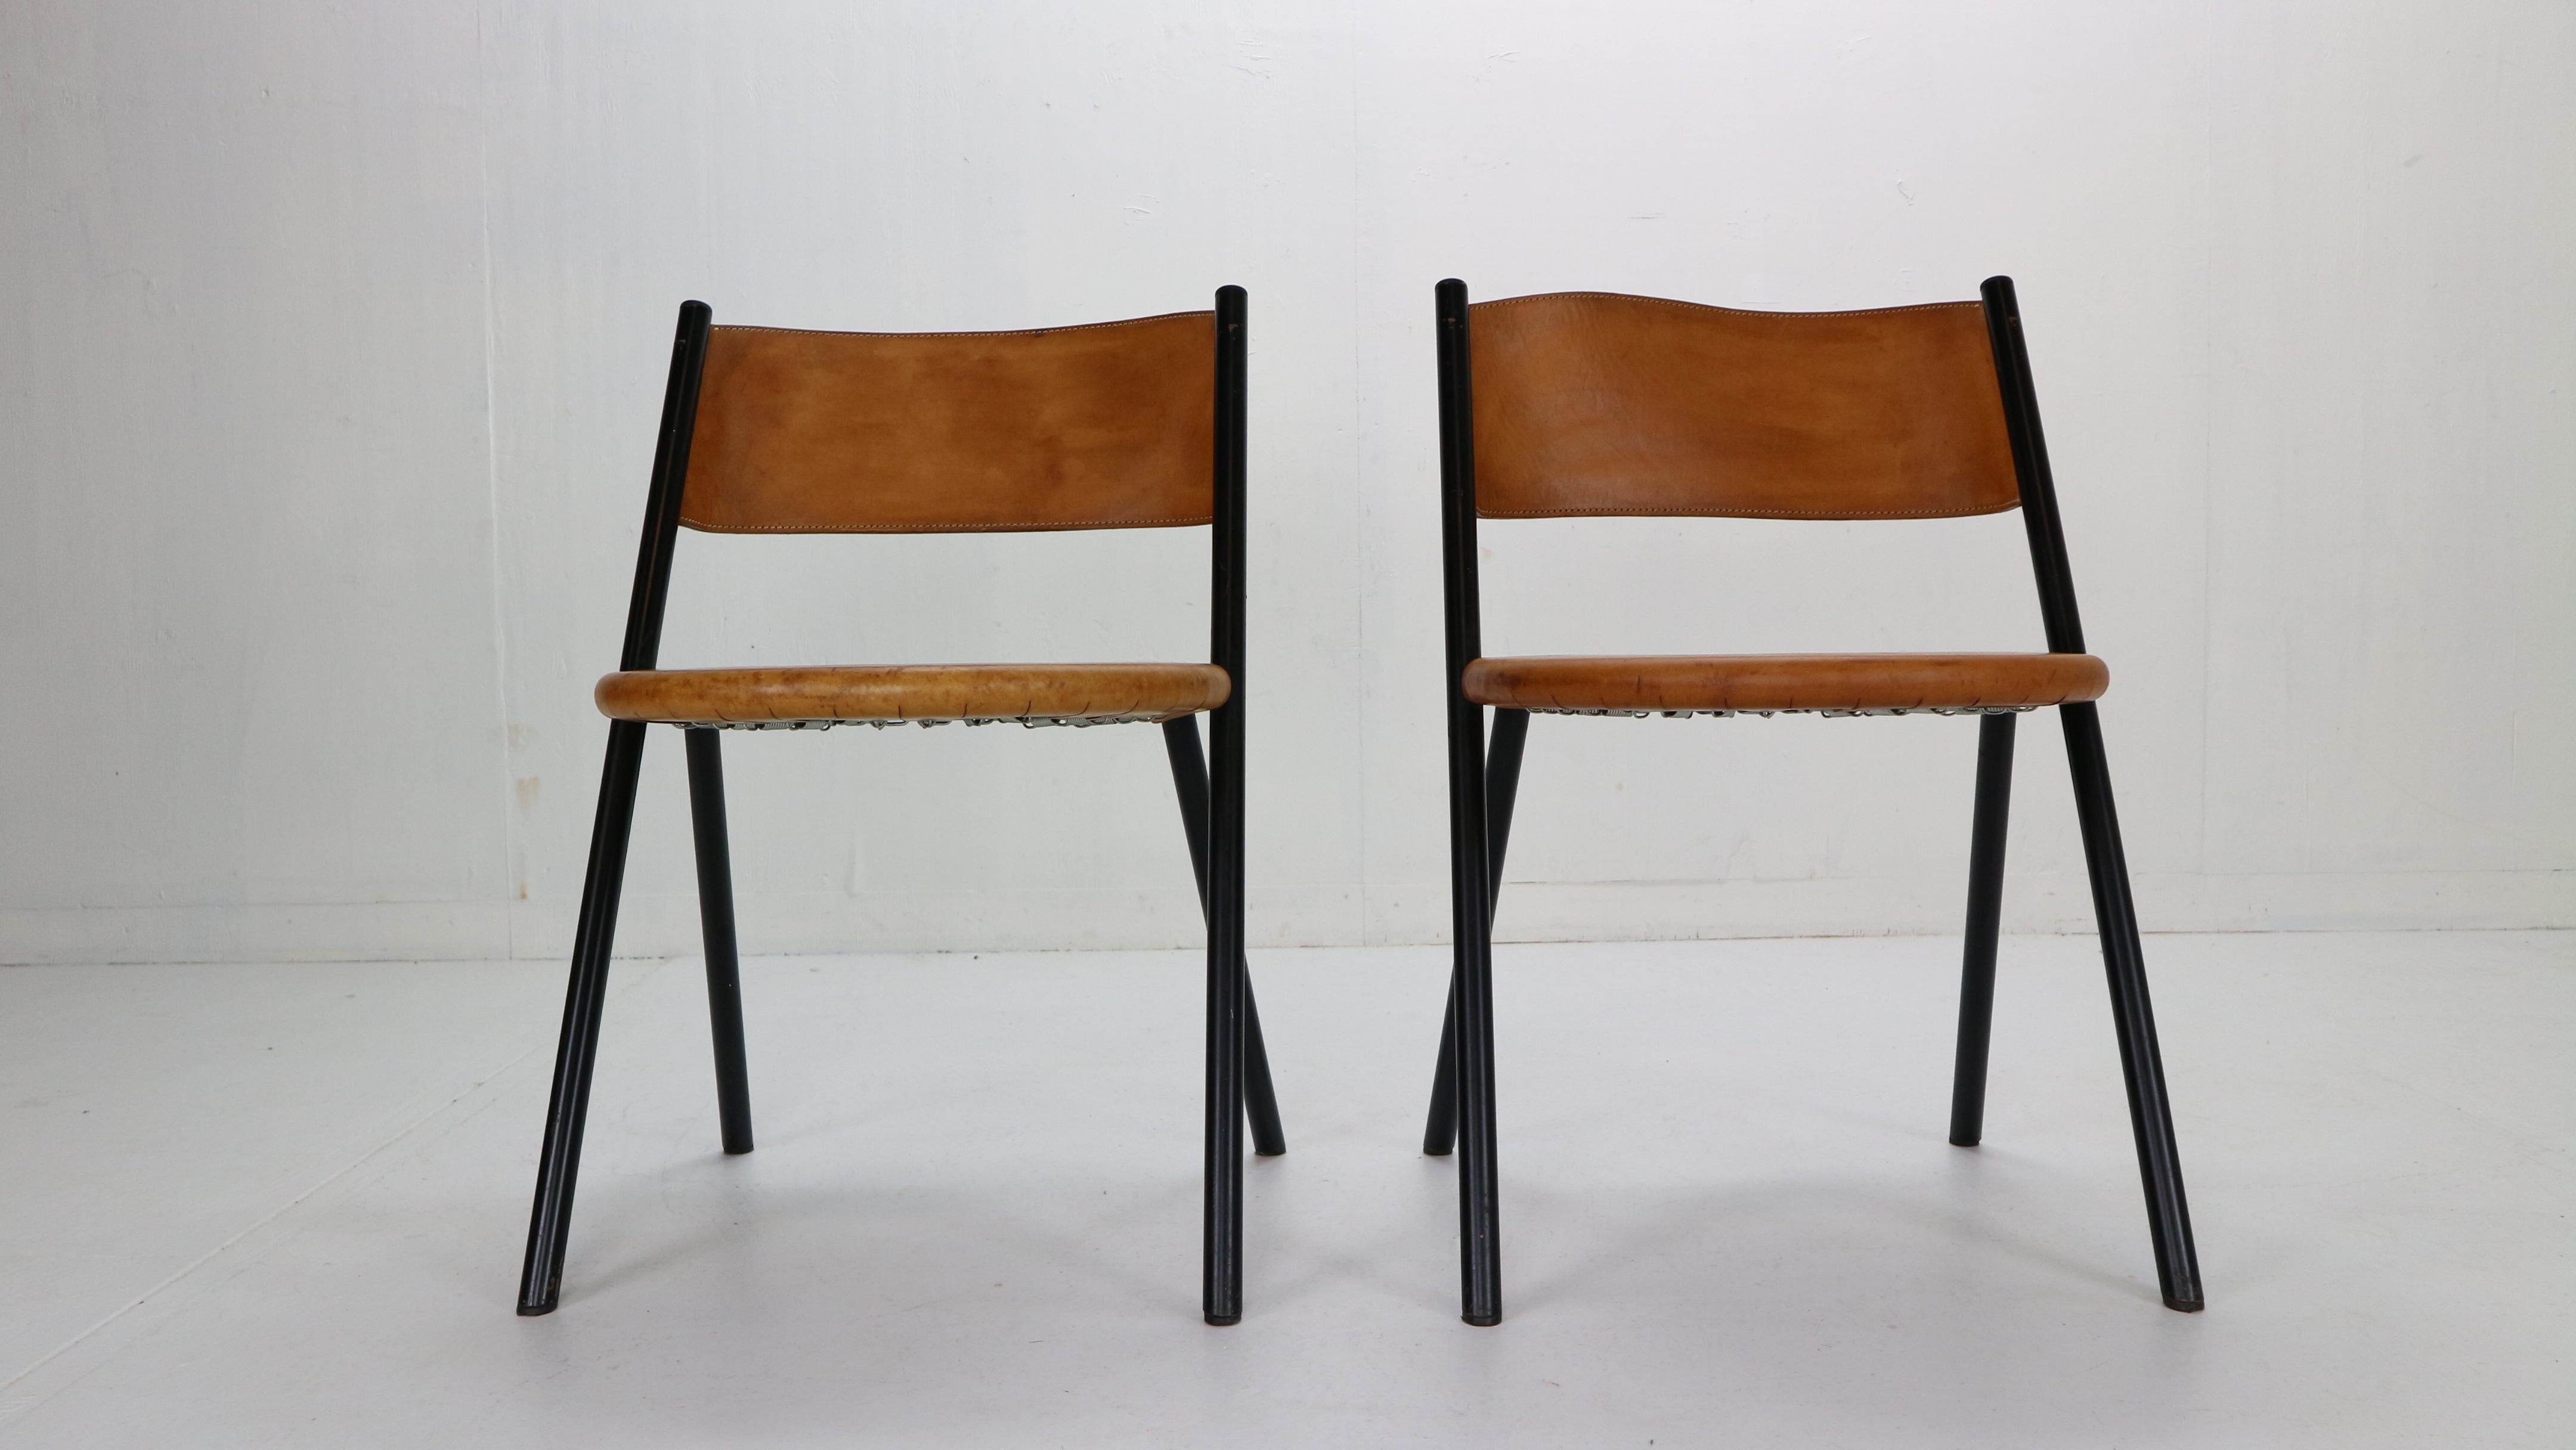 Mid-Century Modern period very rare Italian design chairs manufactured in 1970s, Italy.
Set of 2 chairs consists original thick cognac leather seatings and curved backrest attached on a minimalistic black metal frame.
Due to its age leather